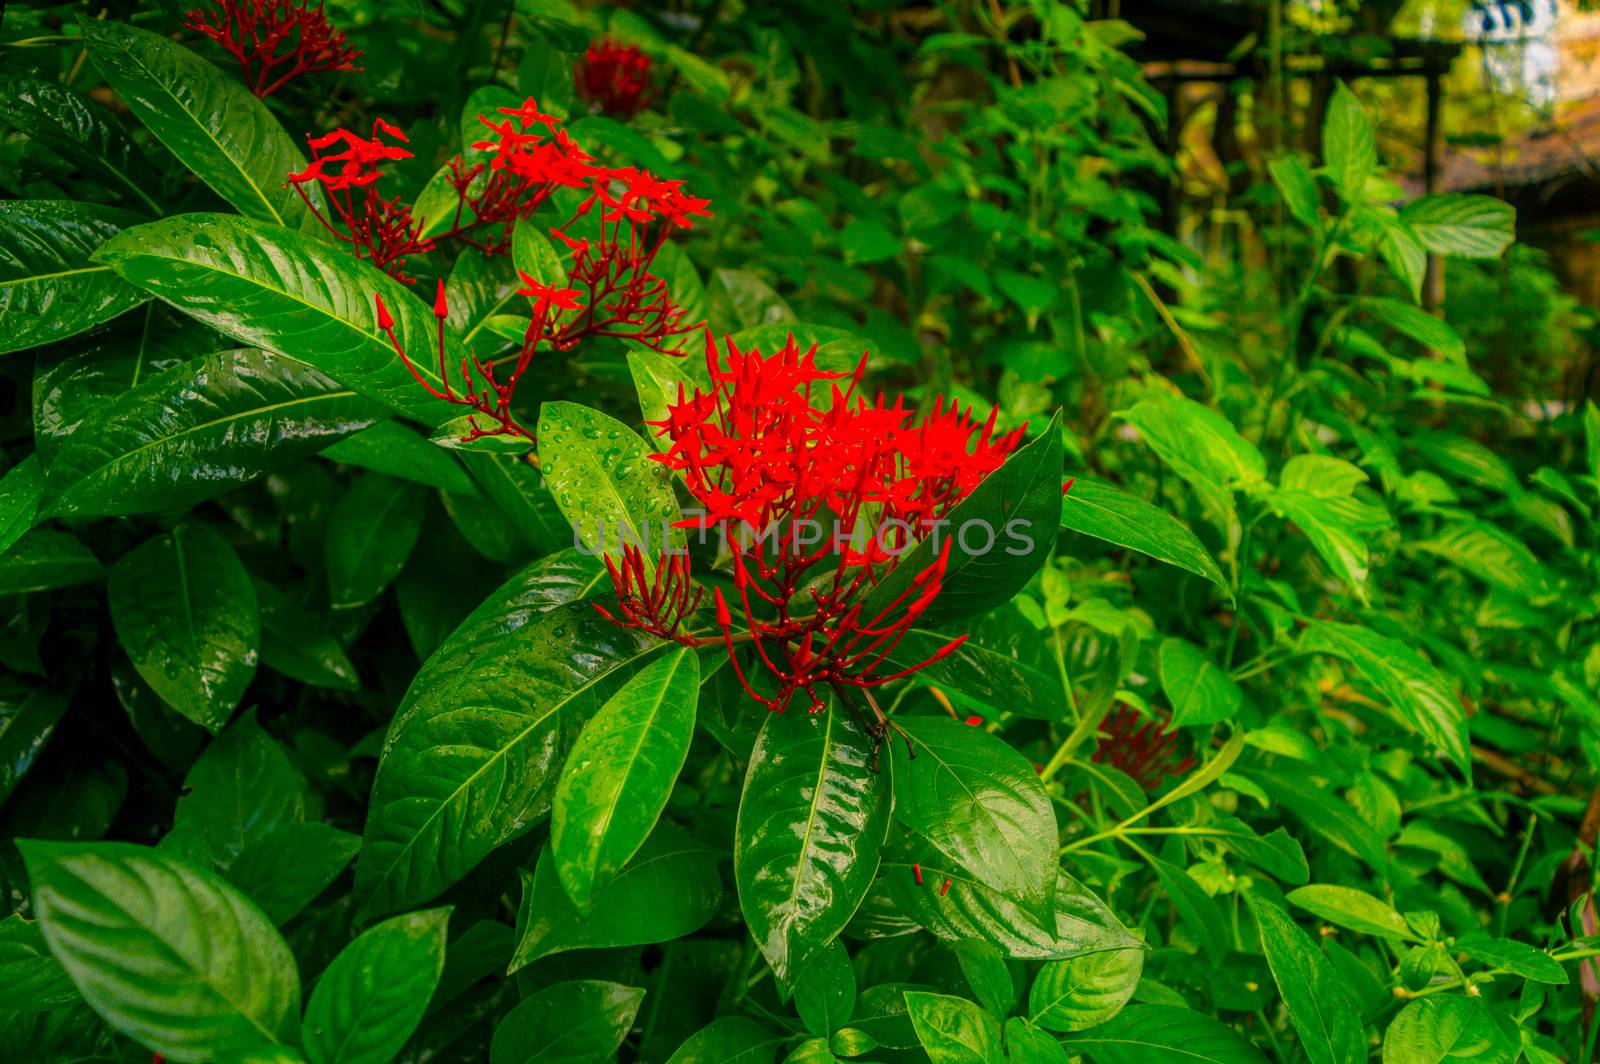 Red flower rain. Wet in water. Ixora Red tiny Flower Plant drenched in rain - Beautiful Home Decor Plant. Flower background design images. Rainy day monsoon season pictures of nature beauty. Close Up. by sudiptabhowmick